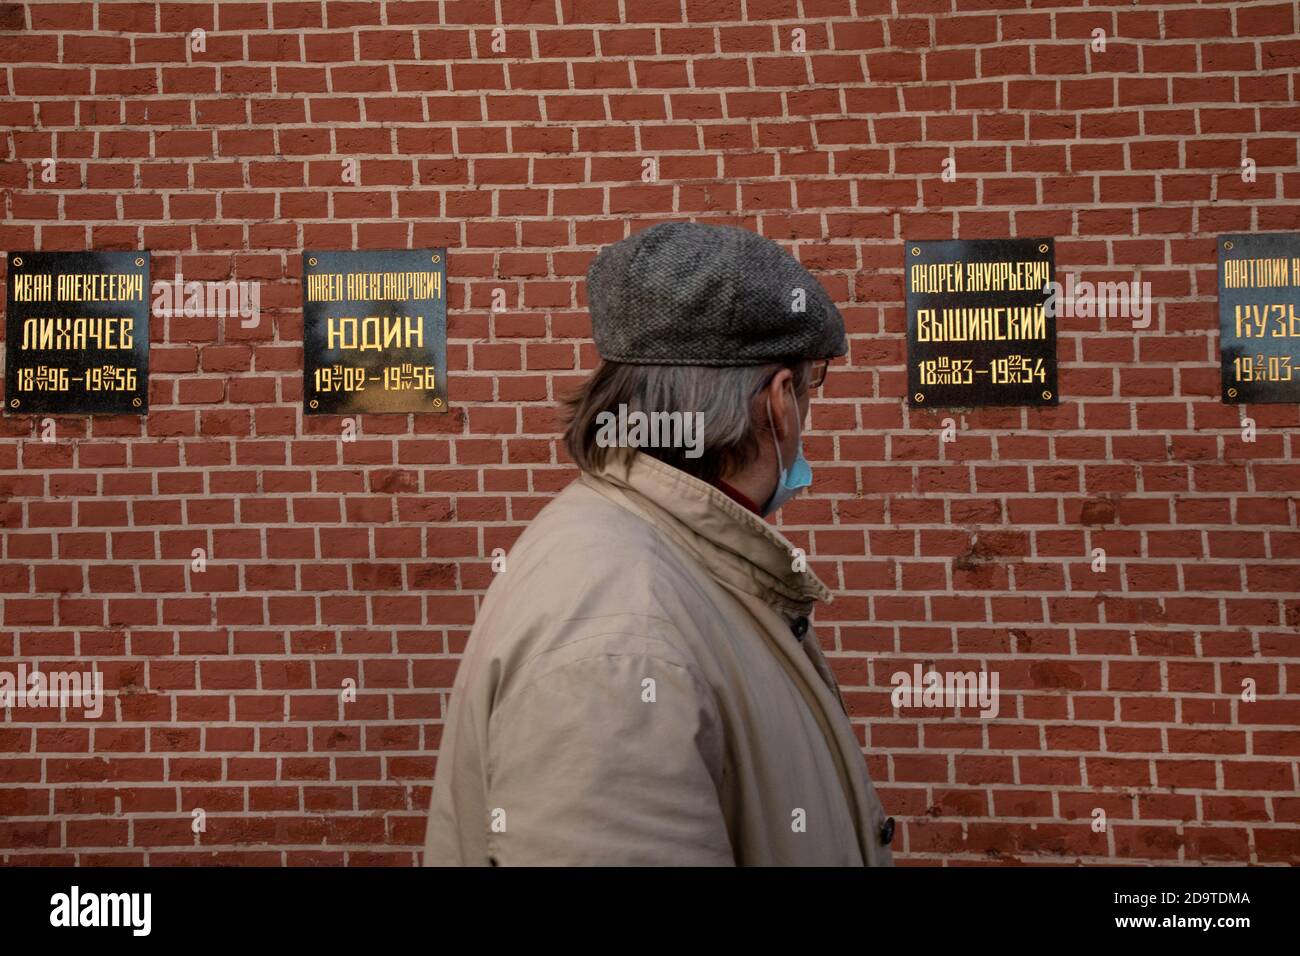 Moscow, Russia. 7th of November, 2020 A man looks at banners with names of soviet politics at the Kremlin wall where the Soviet state leaders are buried, in central Moscow, Russia Stock Photo